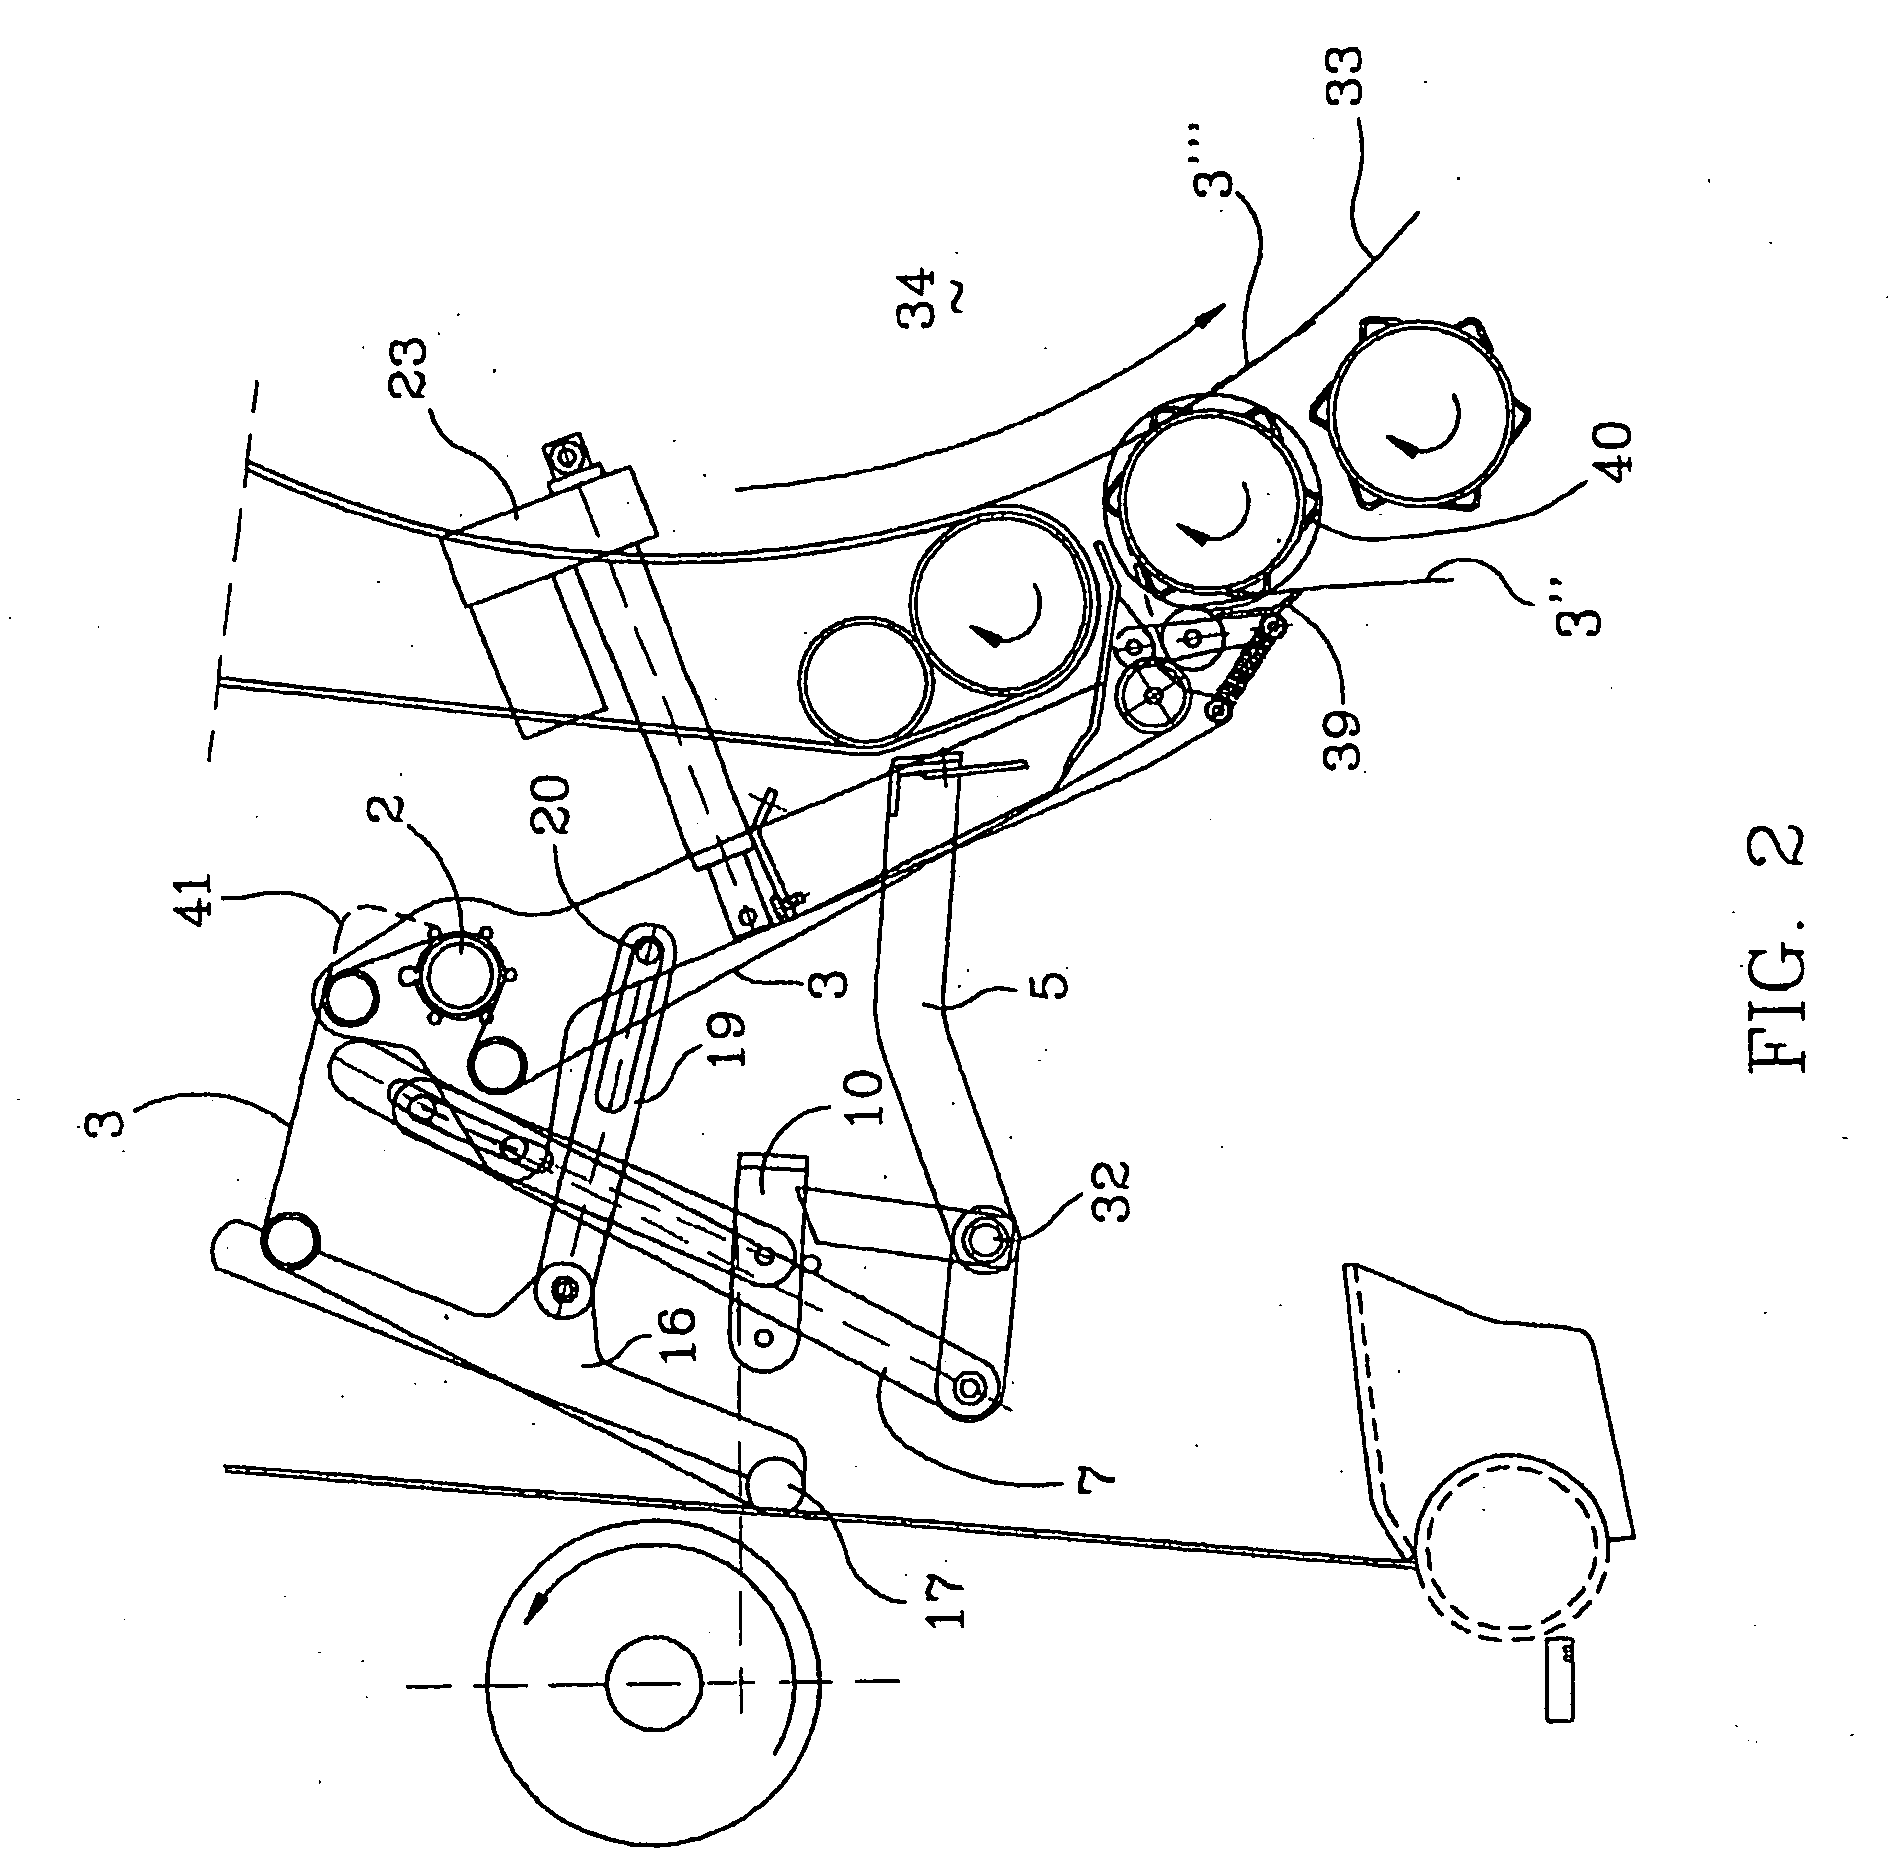 Device for wrapping a bale of pasture or the like